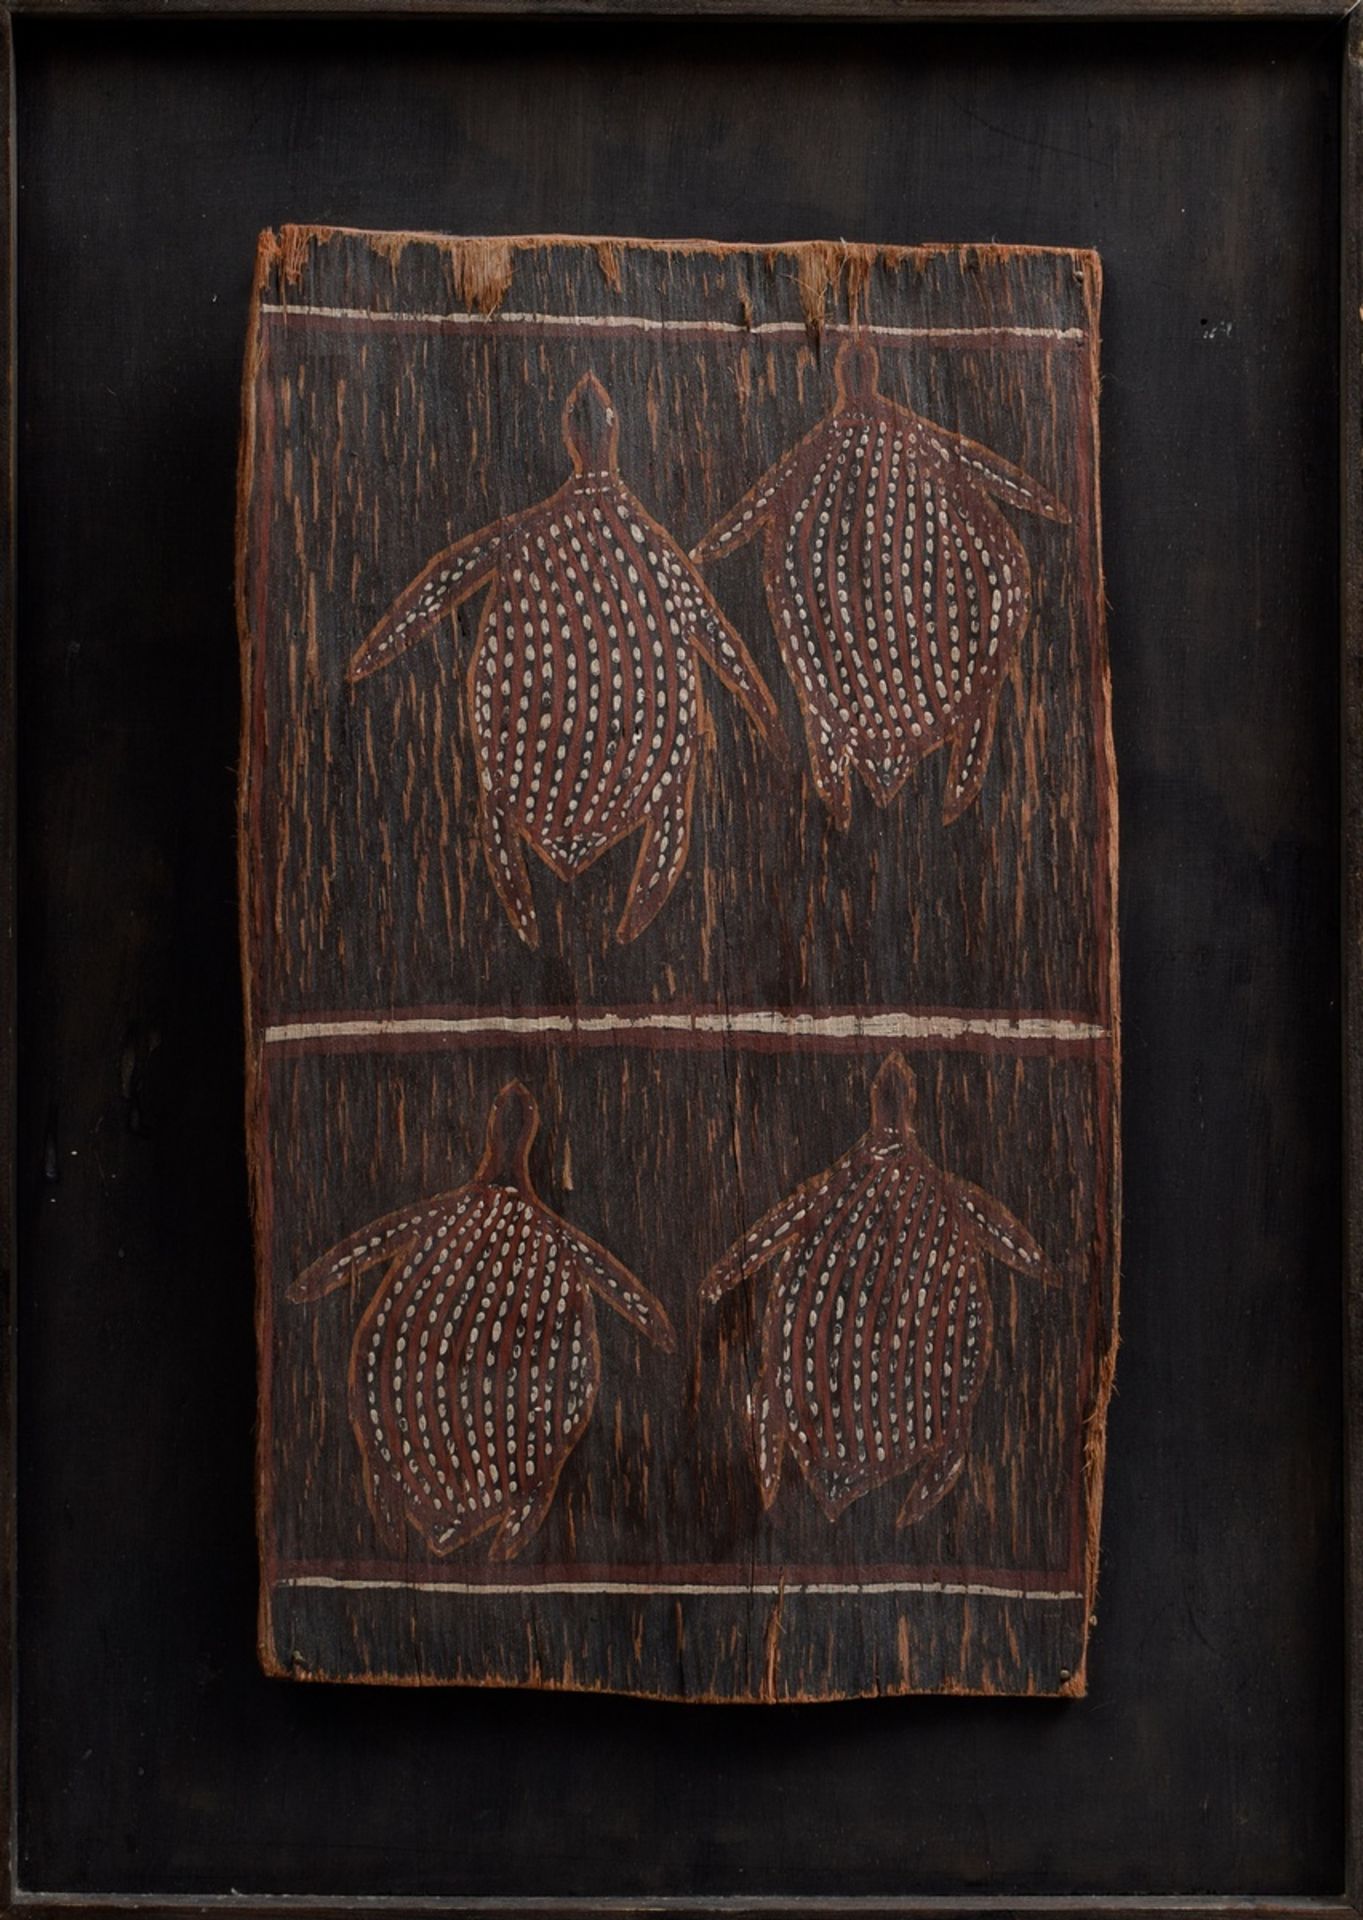 3 Various Aboriginal paintings on tree bark "Turtles and striped or zigzag patterns", earth/natural - Image 2 of 7